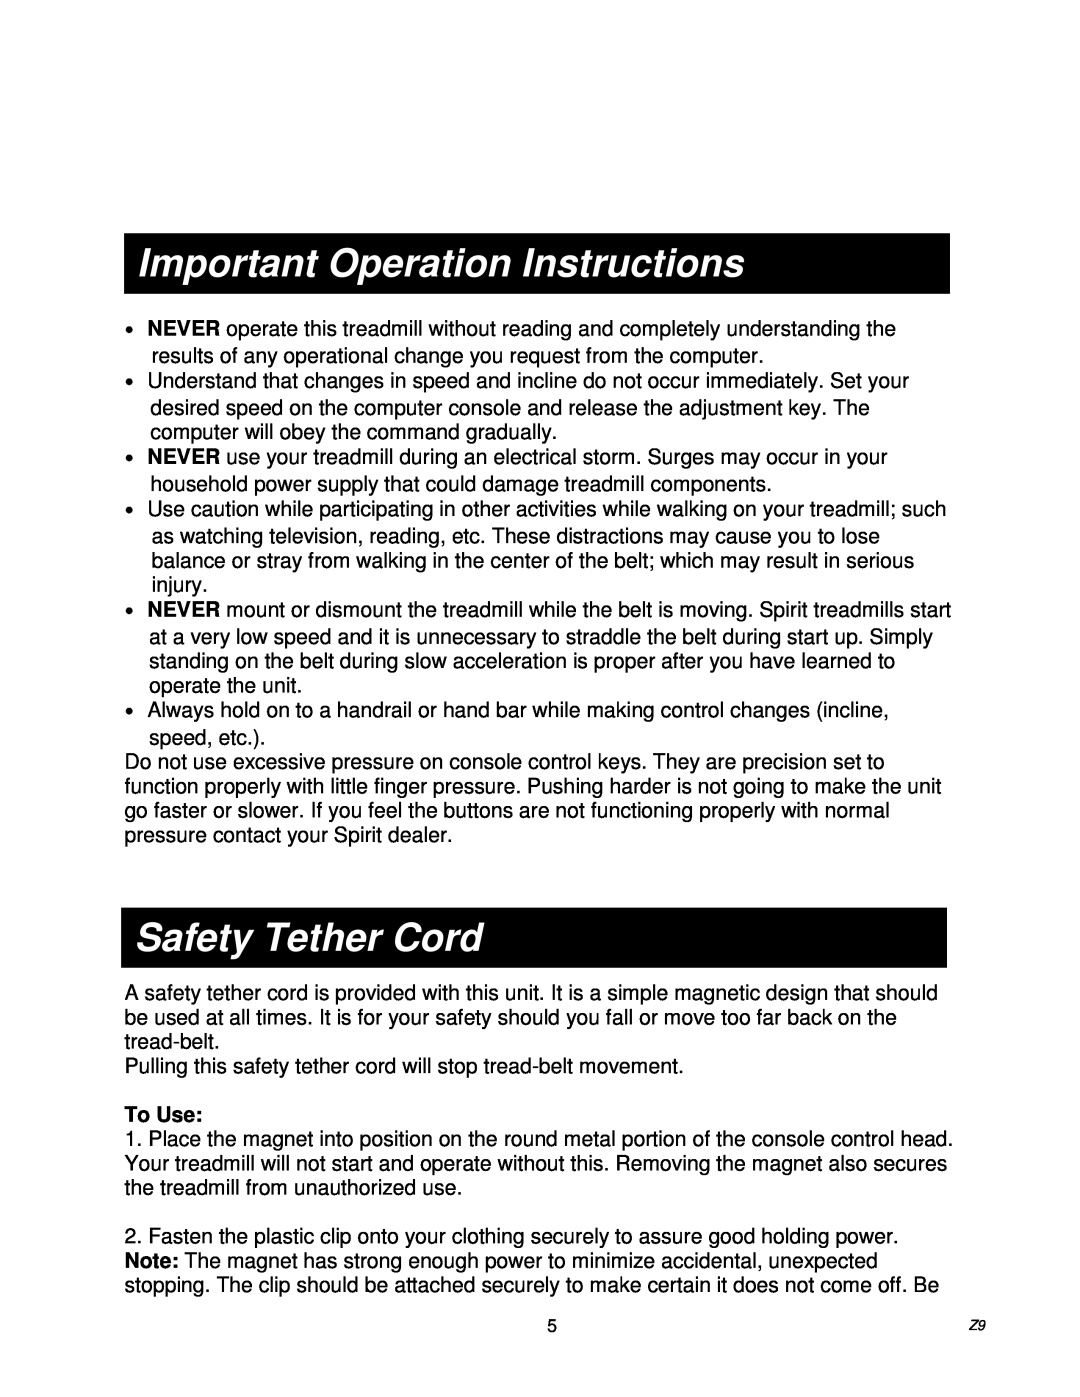 Spirit Z9 owner manual Important Operation Instructions, Safety Tether Cord, To Use 